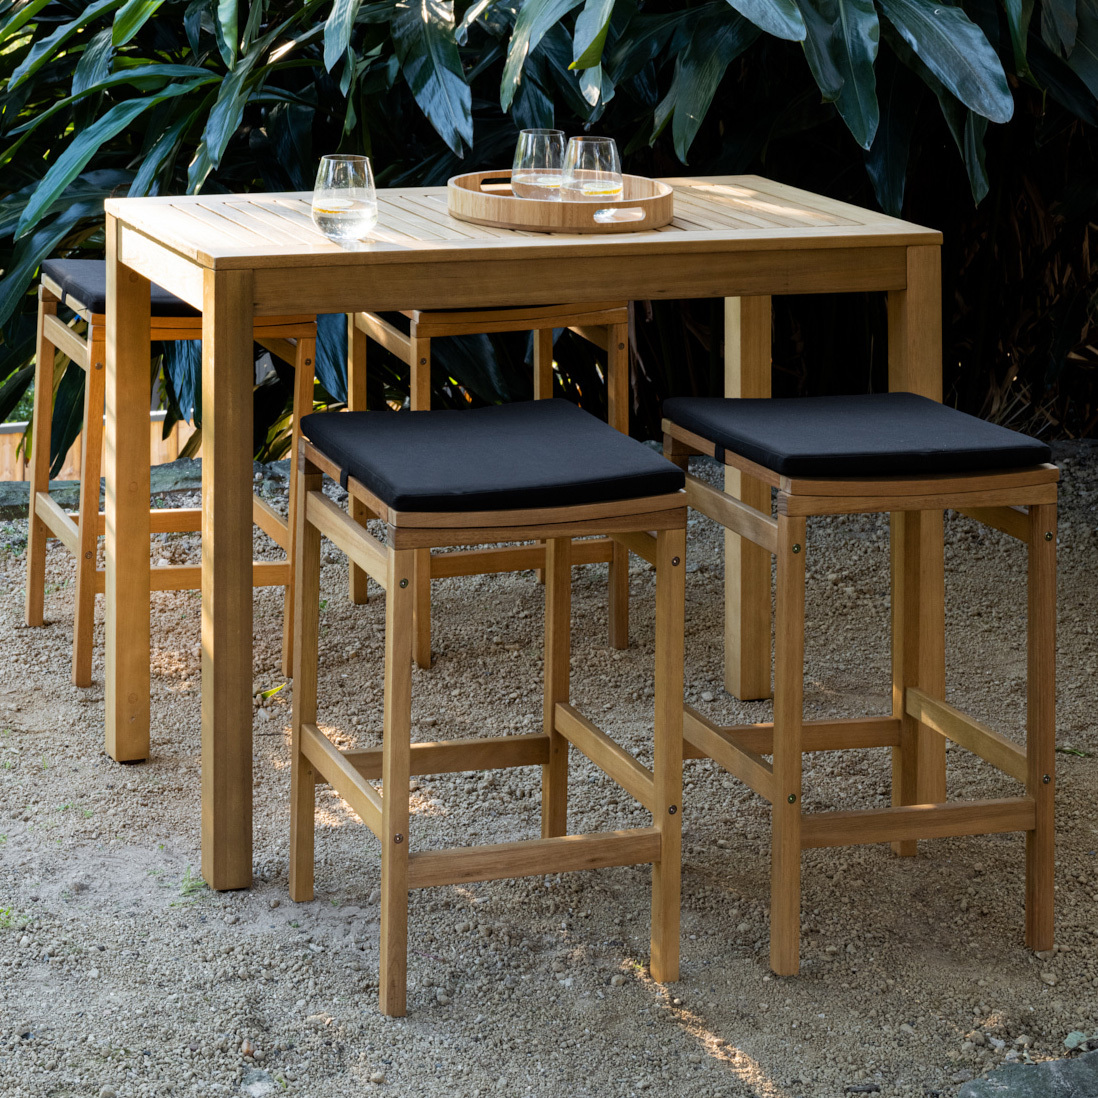 Temple Webster Verona Wooden Outdoor, Wooden Bar Table And Stools